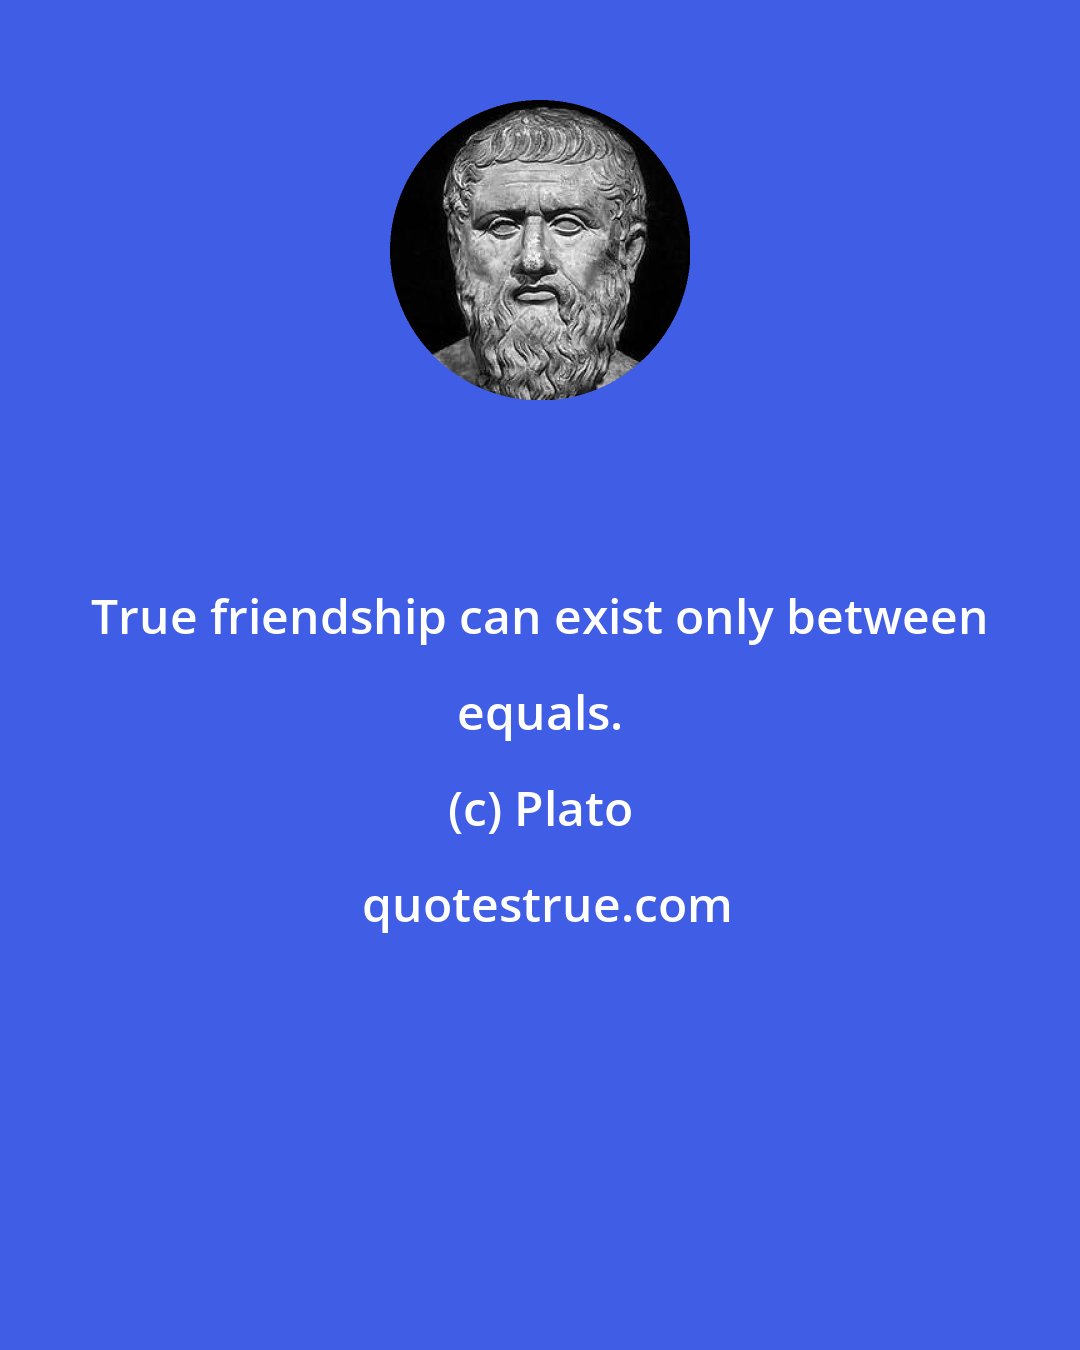 Plato: True friendship can exist only between equals.